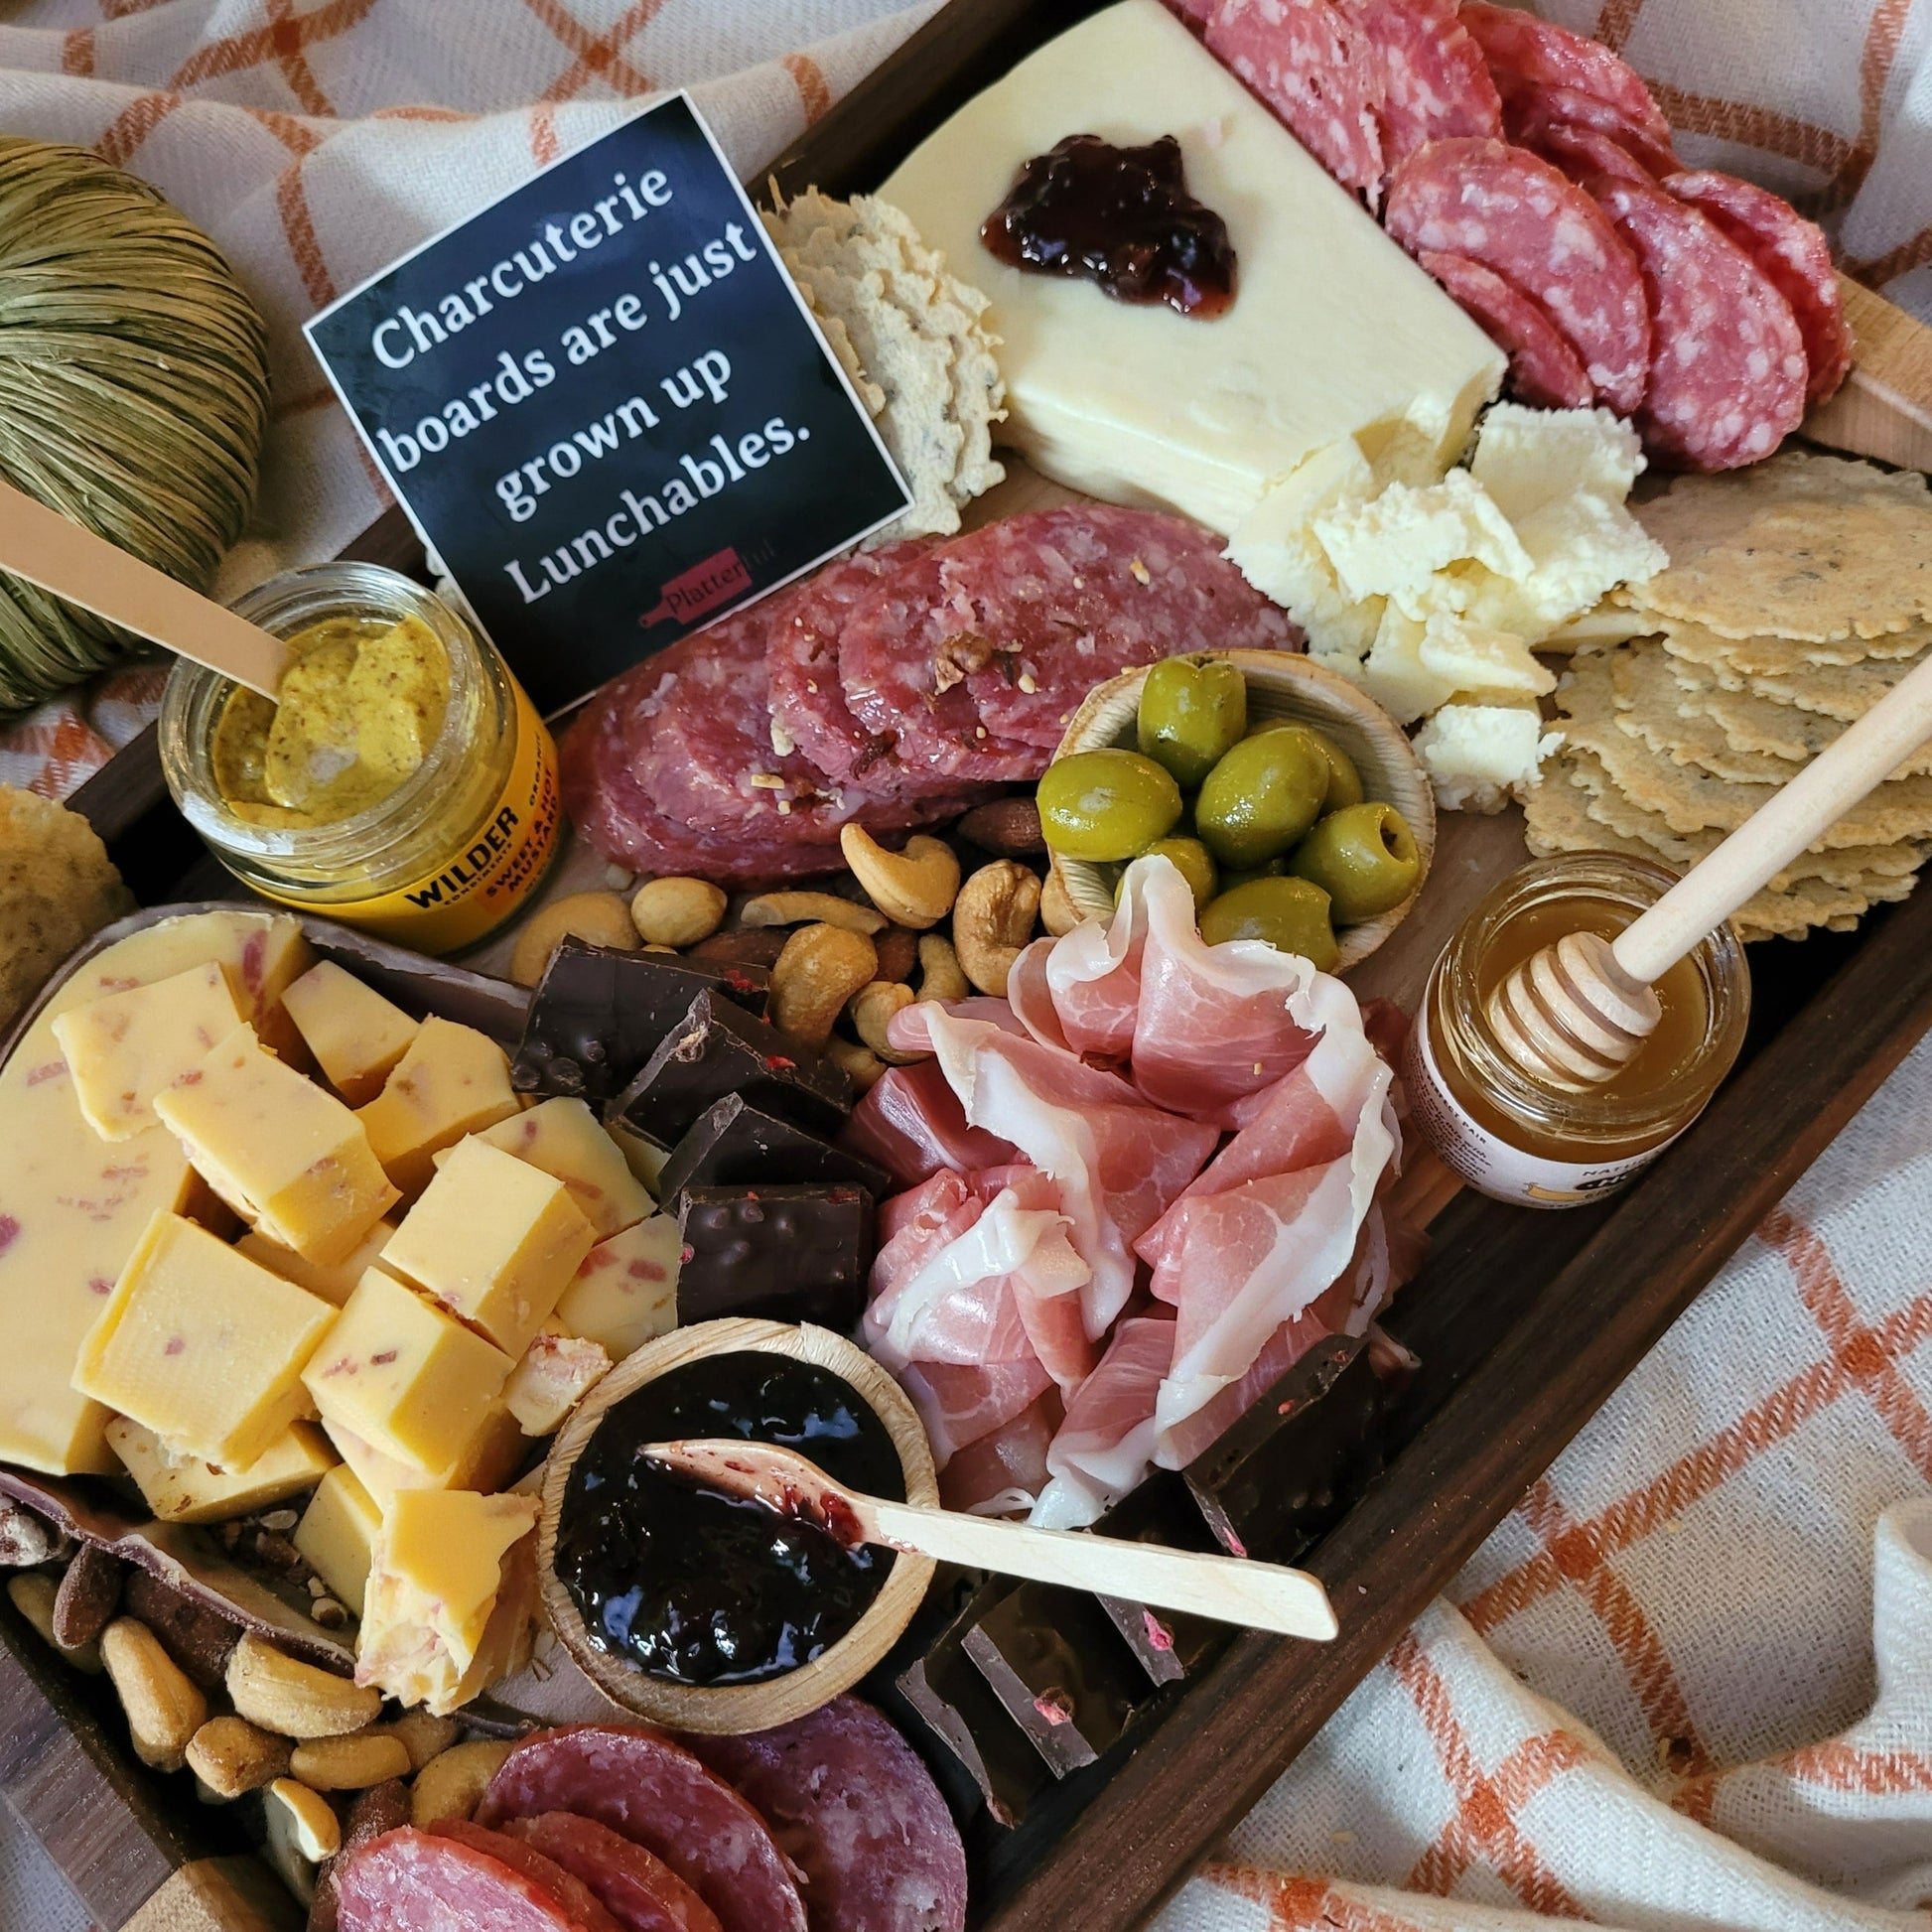 Charcuterie Board filled with a variety of meats and cheeses